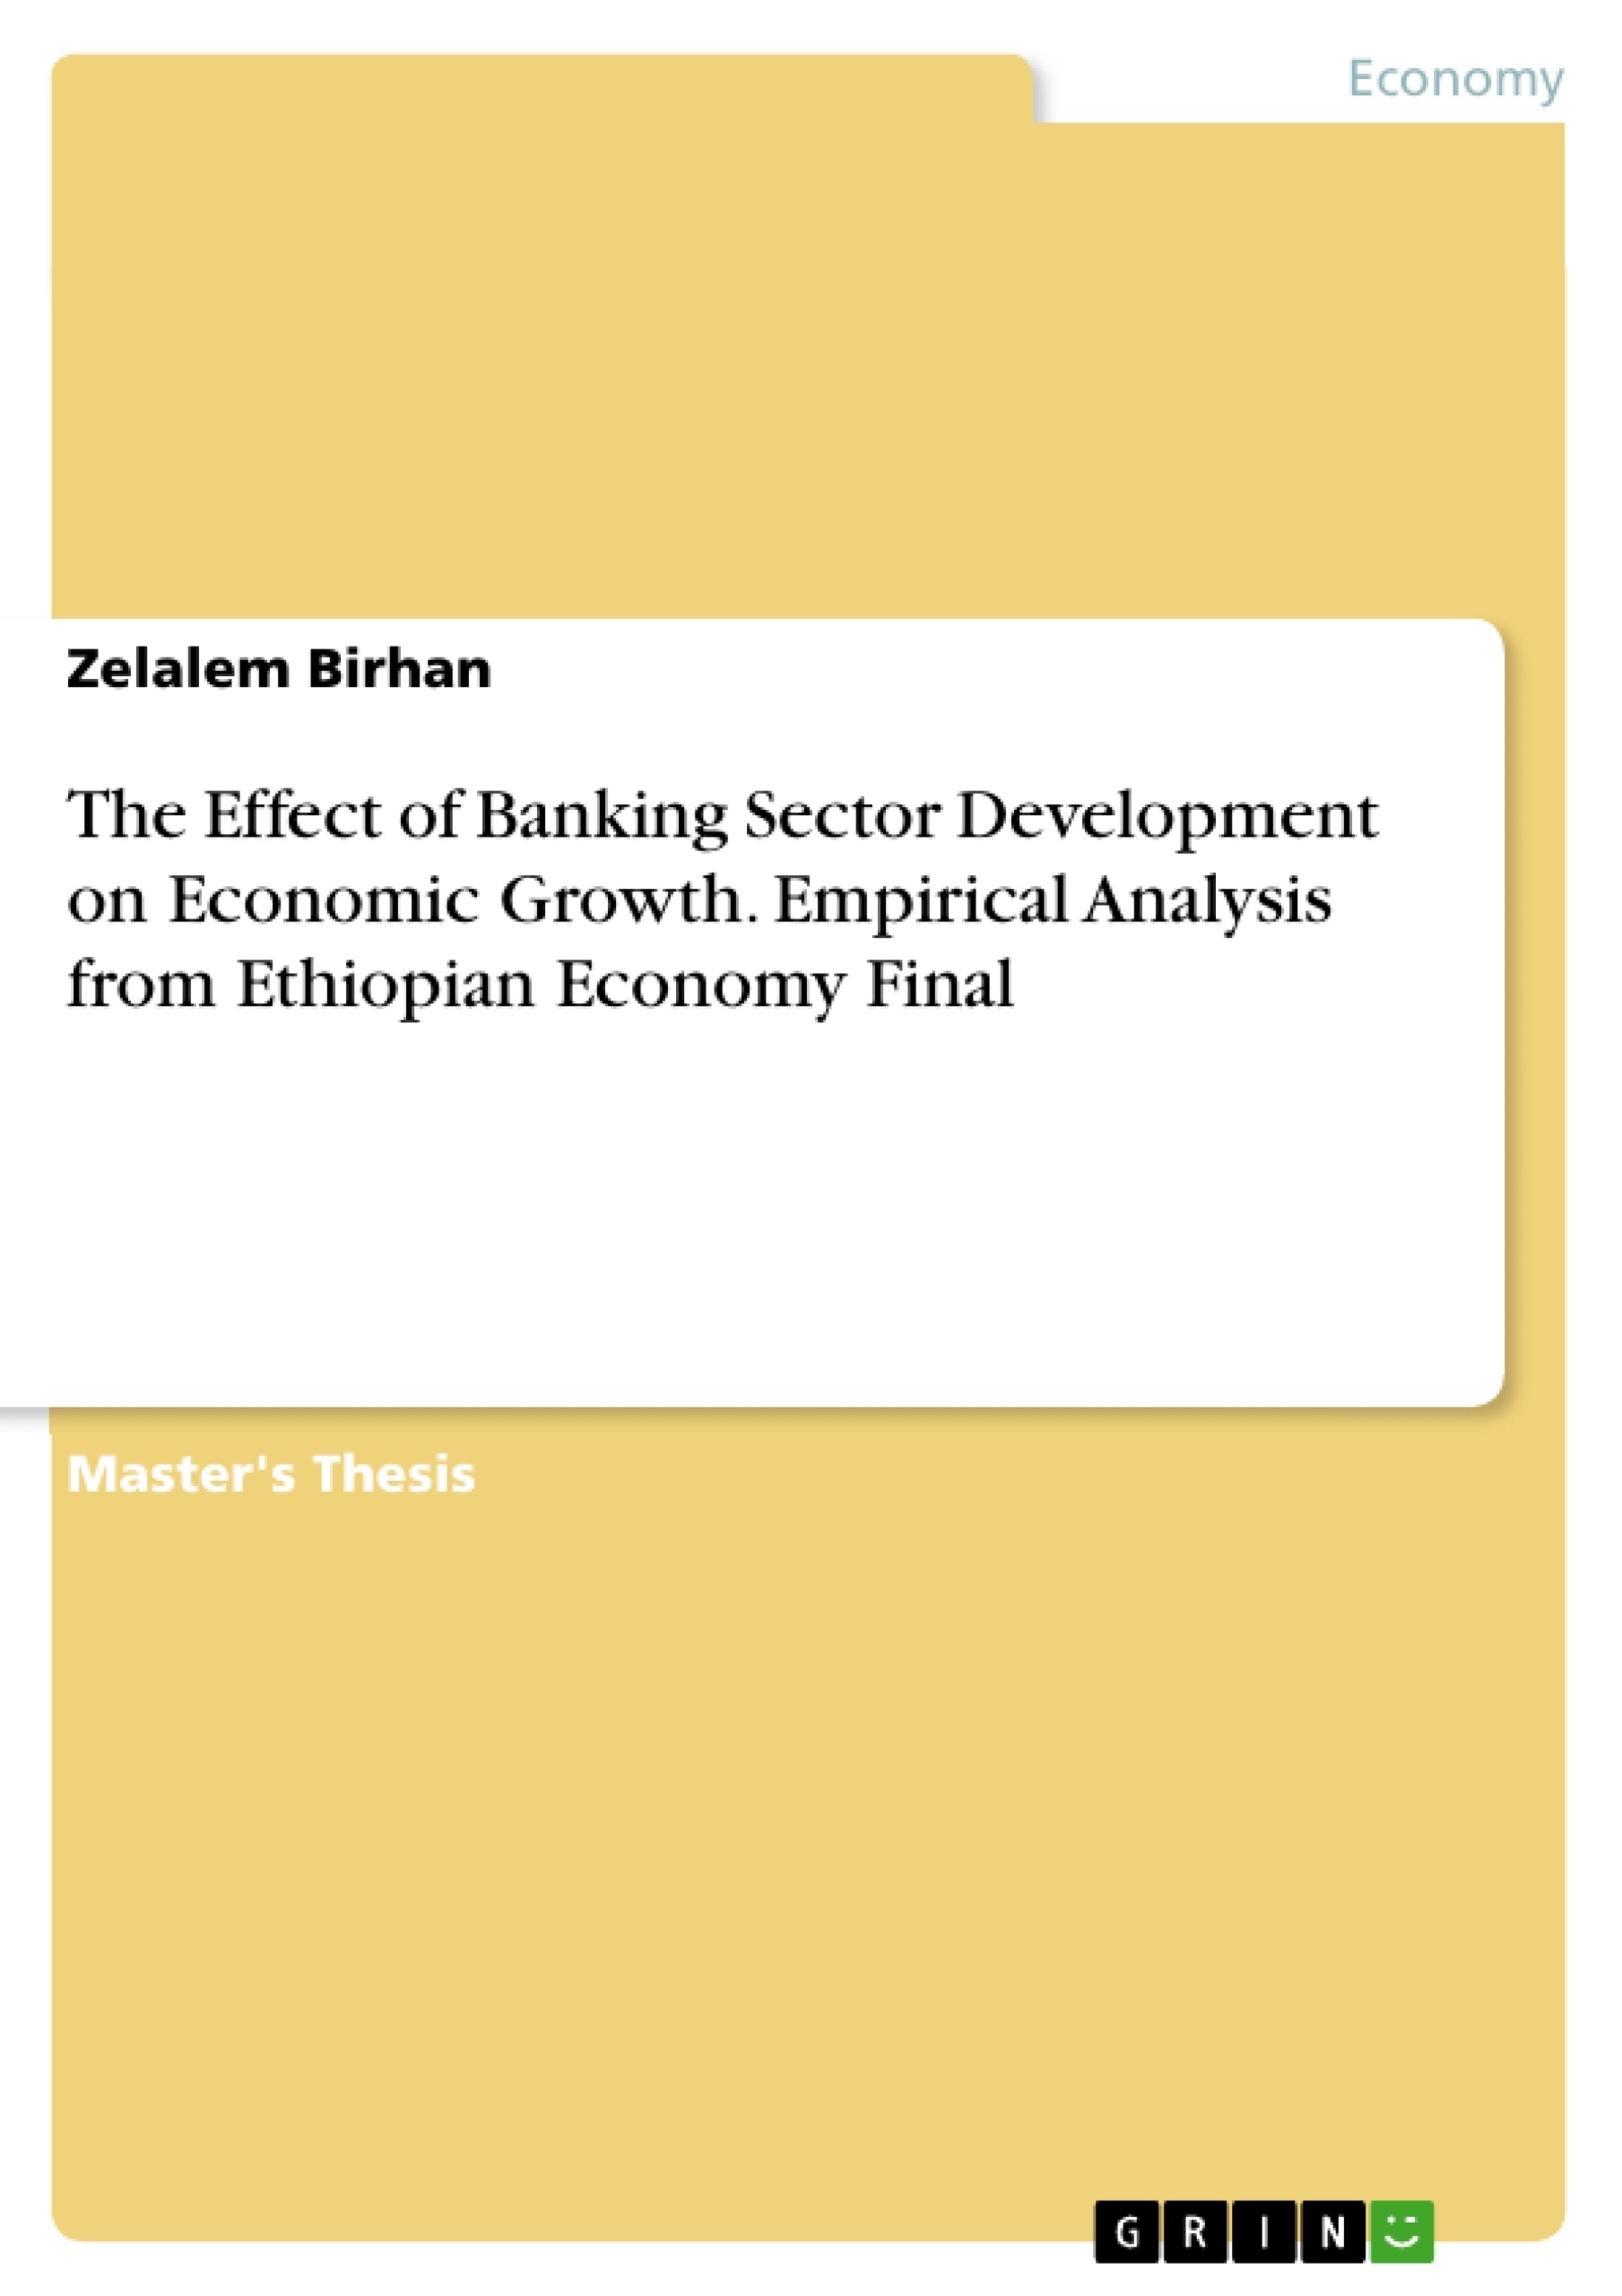 Title: The Effect of Banking Sector Development on Economic Growth. Empirical Analysis from Ethiopian Economy Final